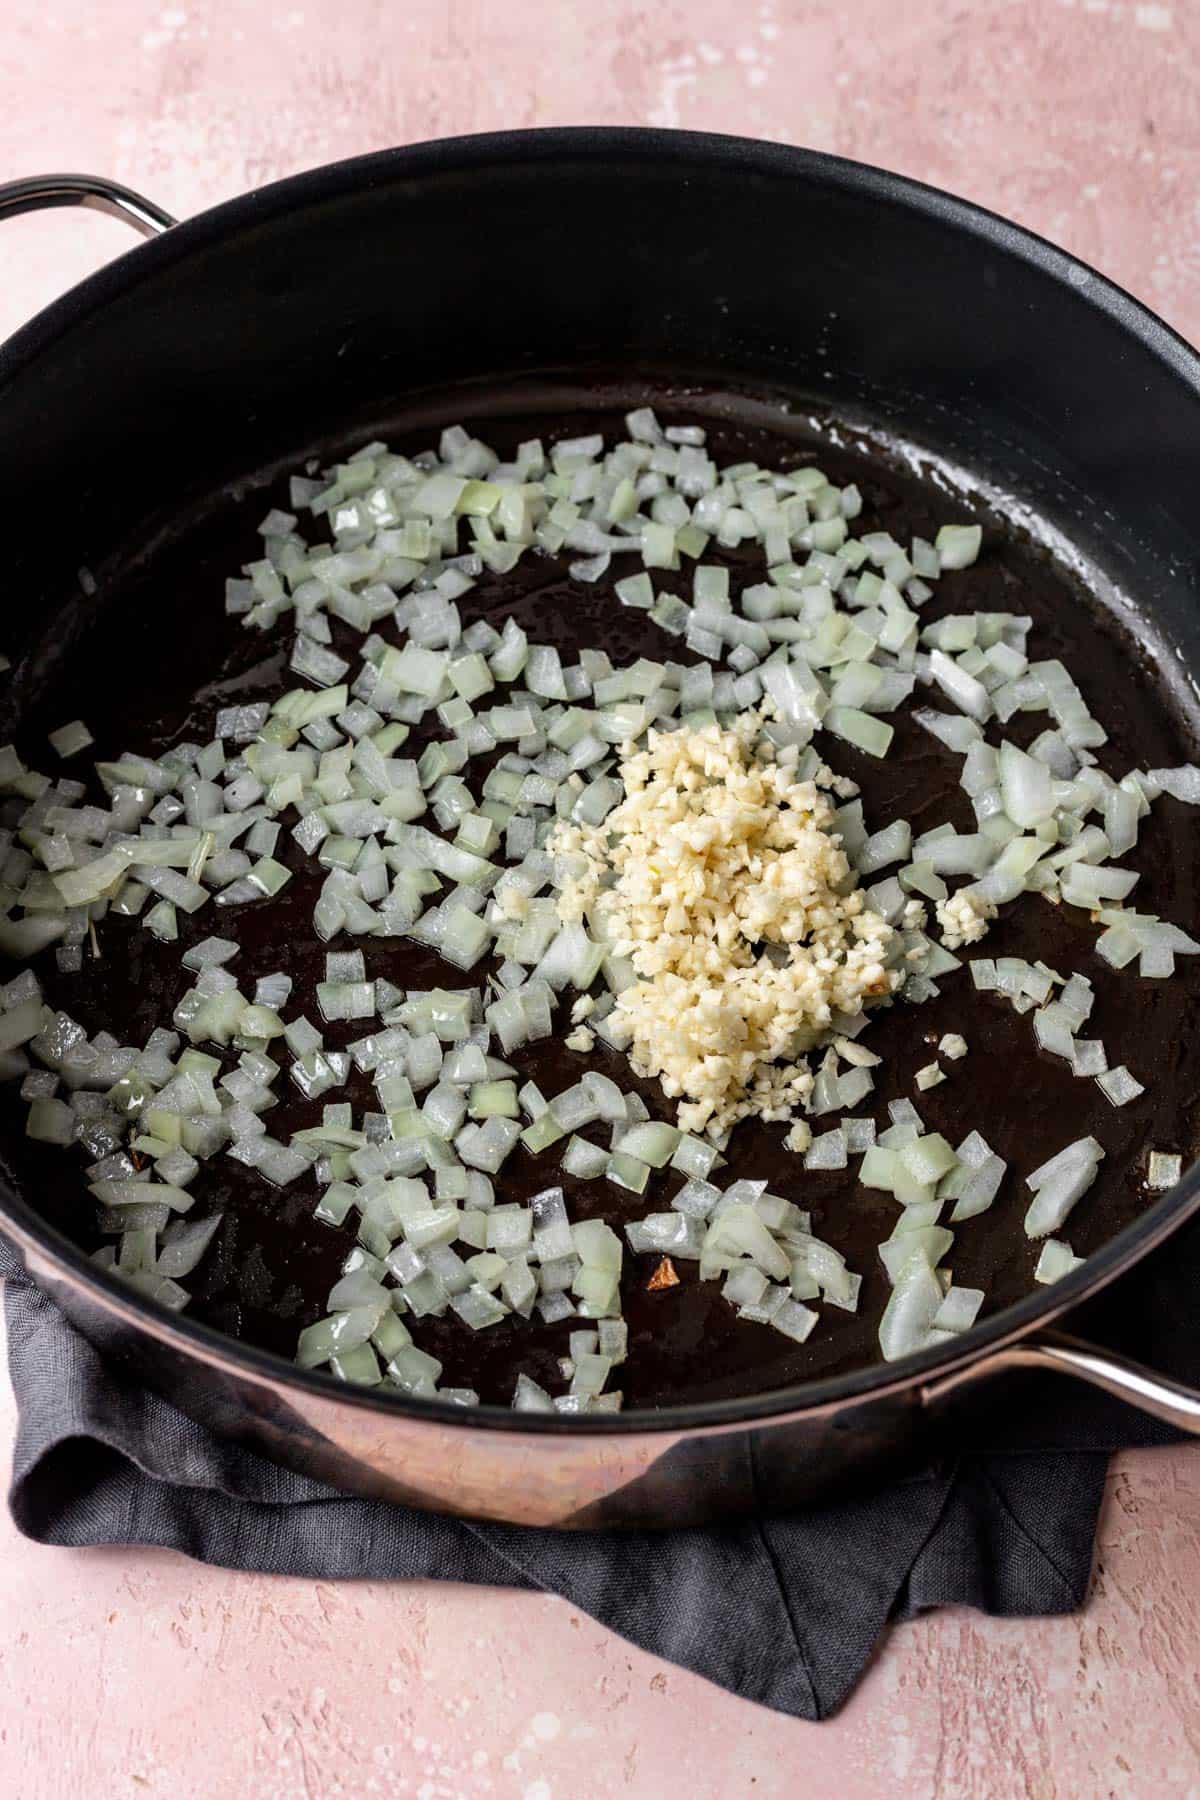 Onions and garlic sautéing in a large skillet.